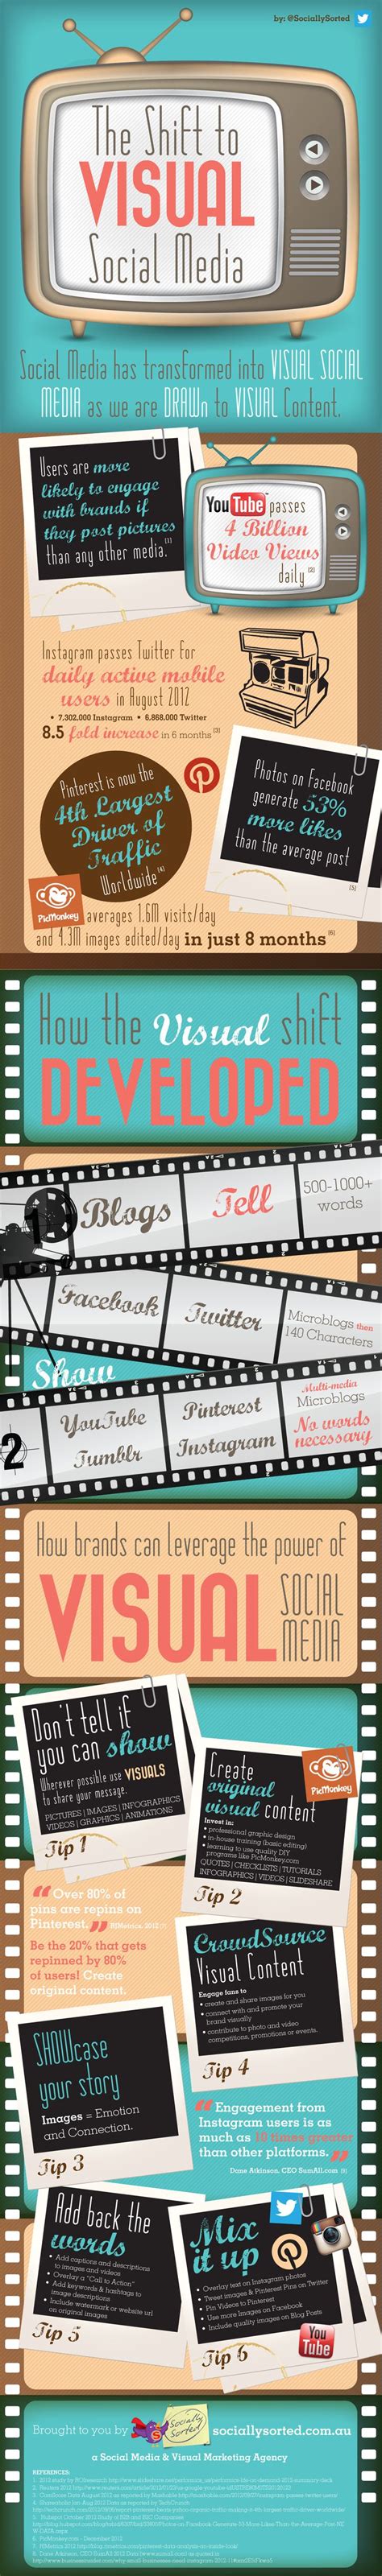 6 Ways Social Media Marketers Should Capitalize On The Visual Content Revolution Infographic